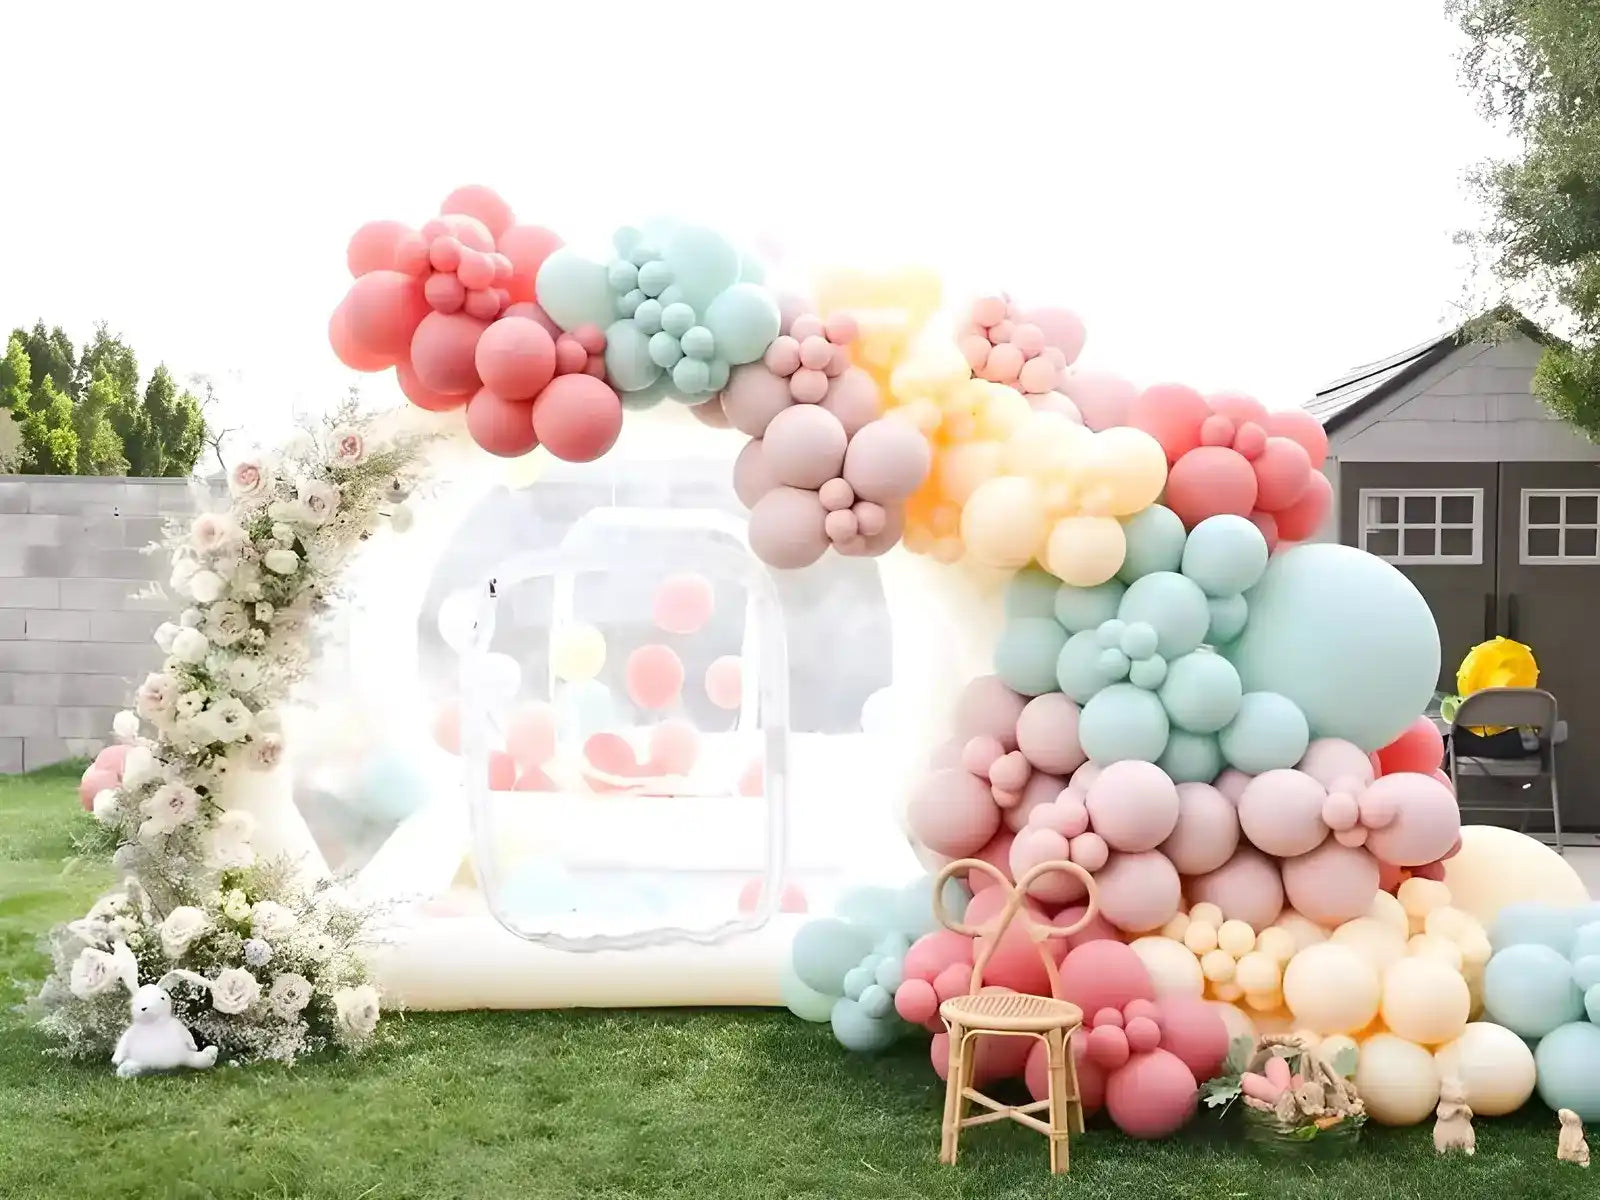 The Bubble House, transparent inflatable bubble tent, decorated with beautiful balloons in the backyard